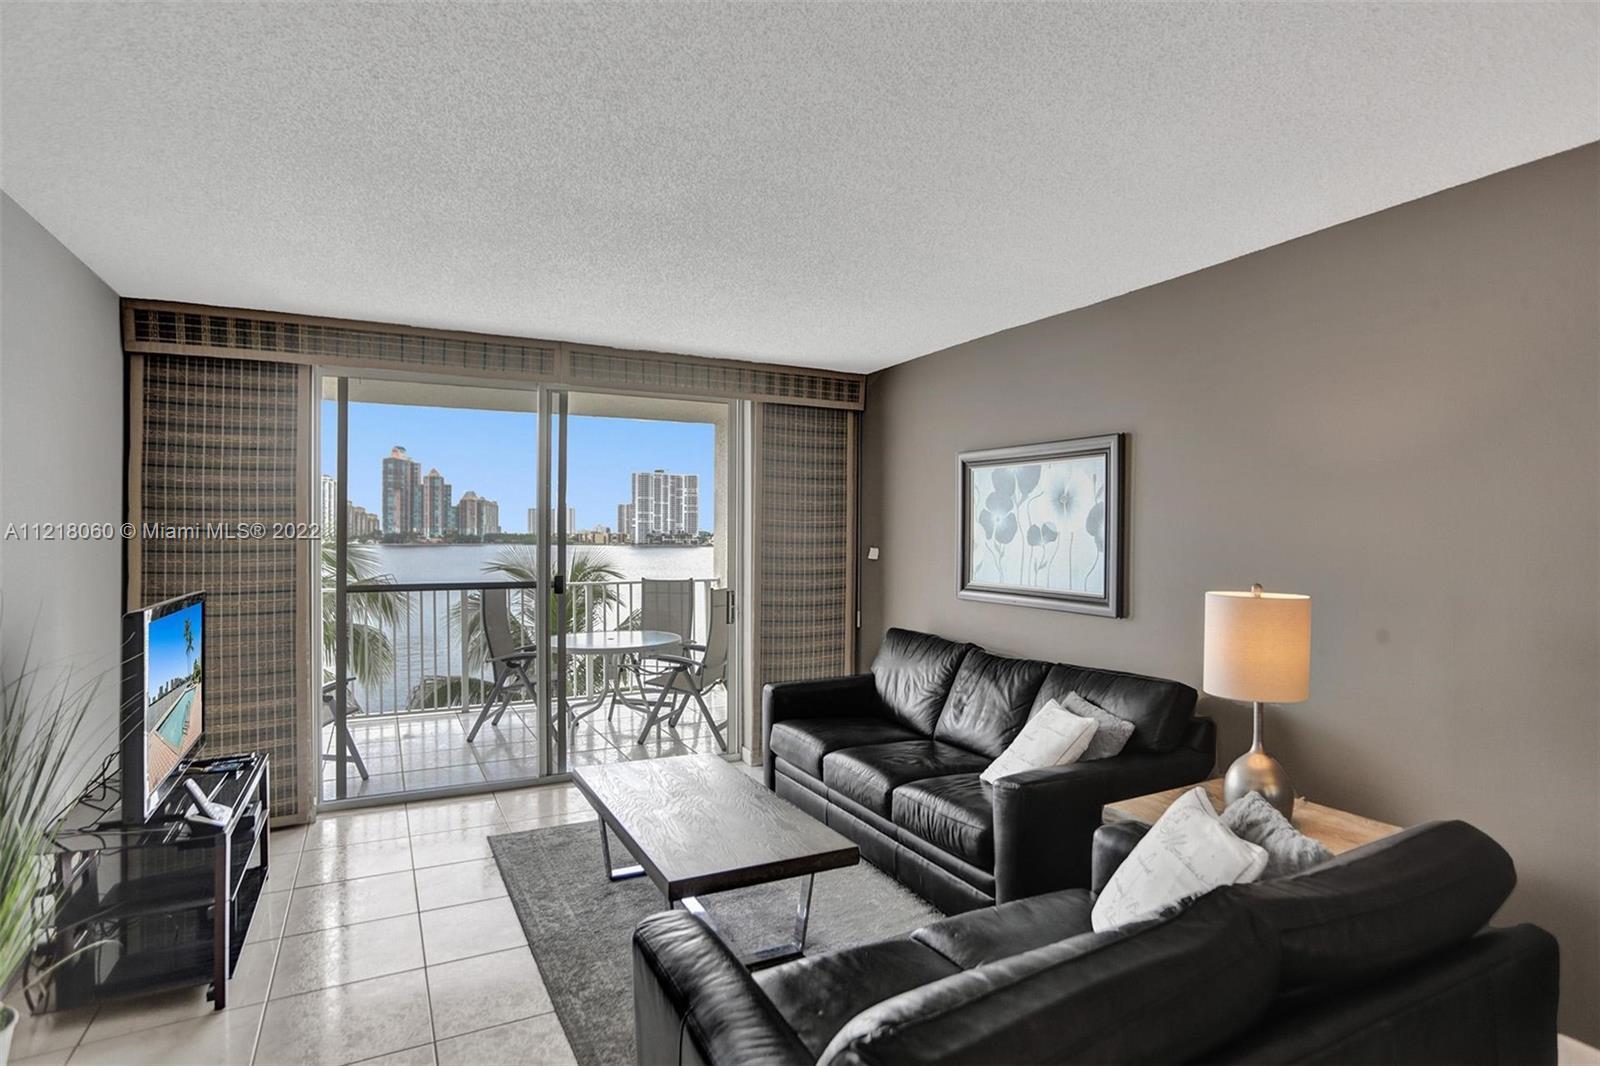 Unique opportunity to own in LES PELICANS Sunny Isles. Great and remodeled 2bed-2baths, open concept